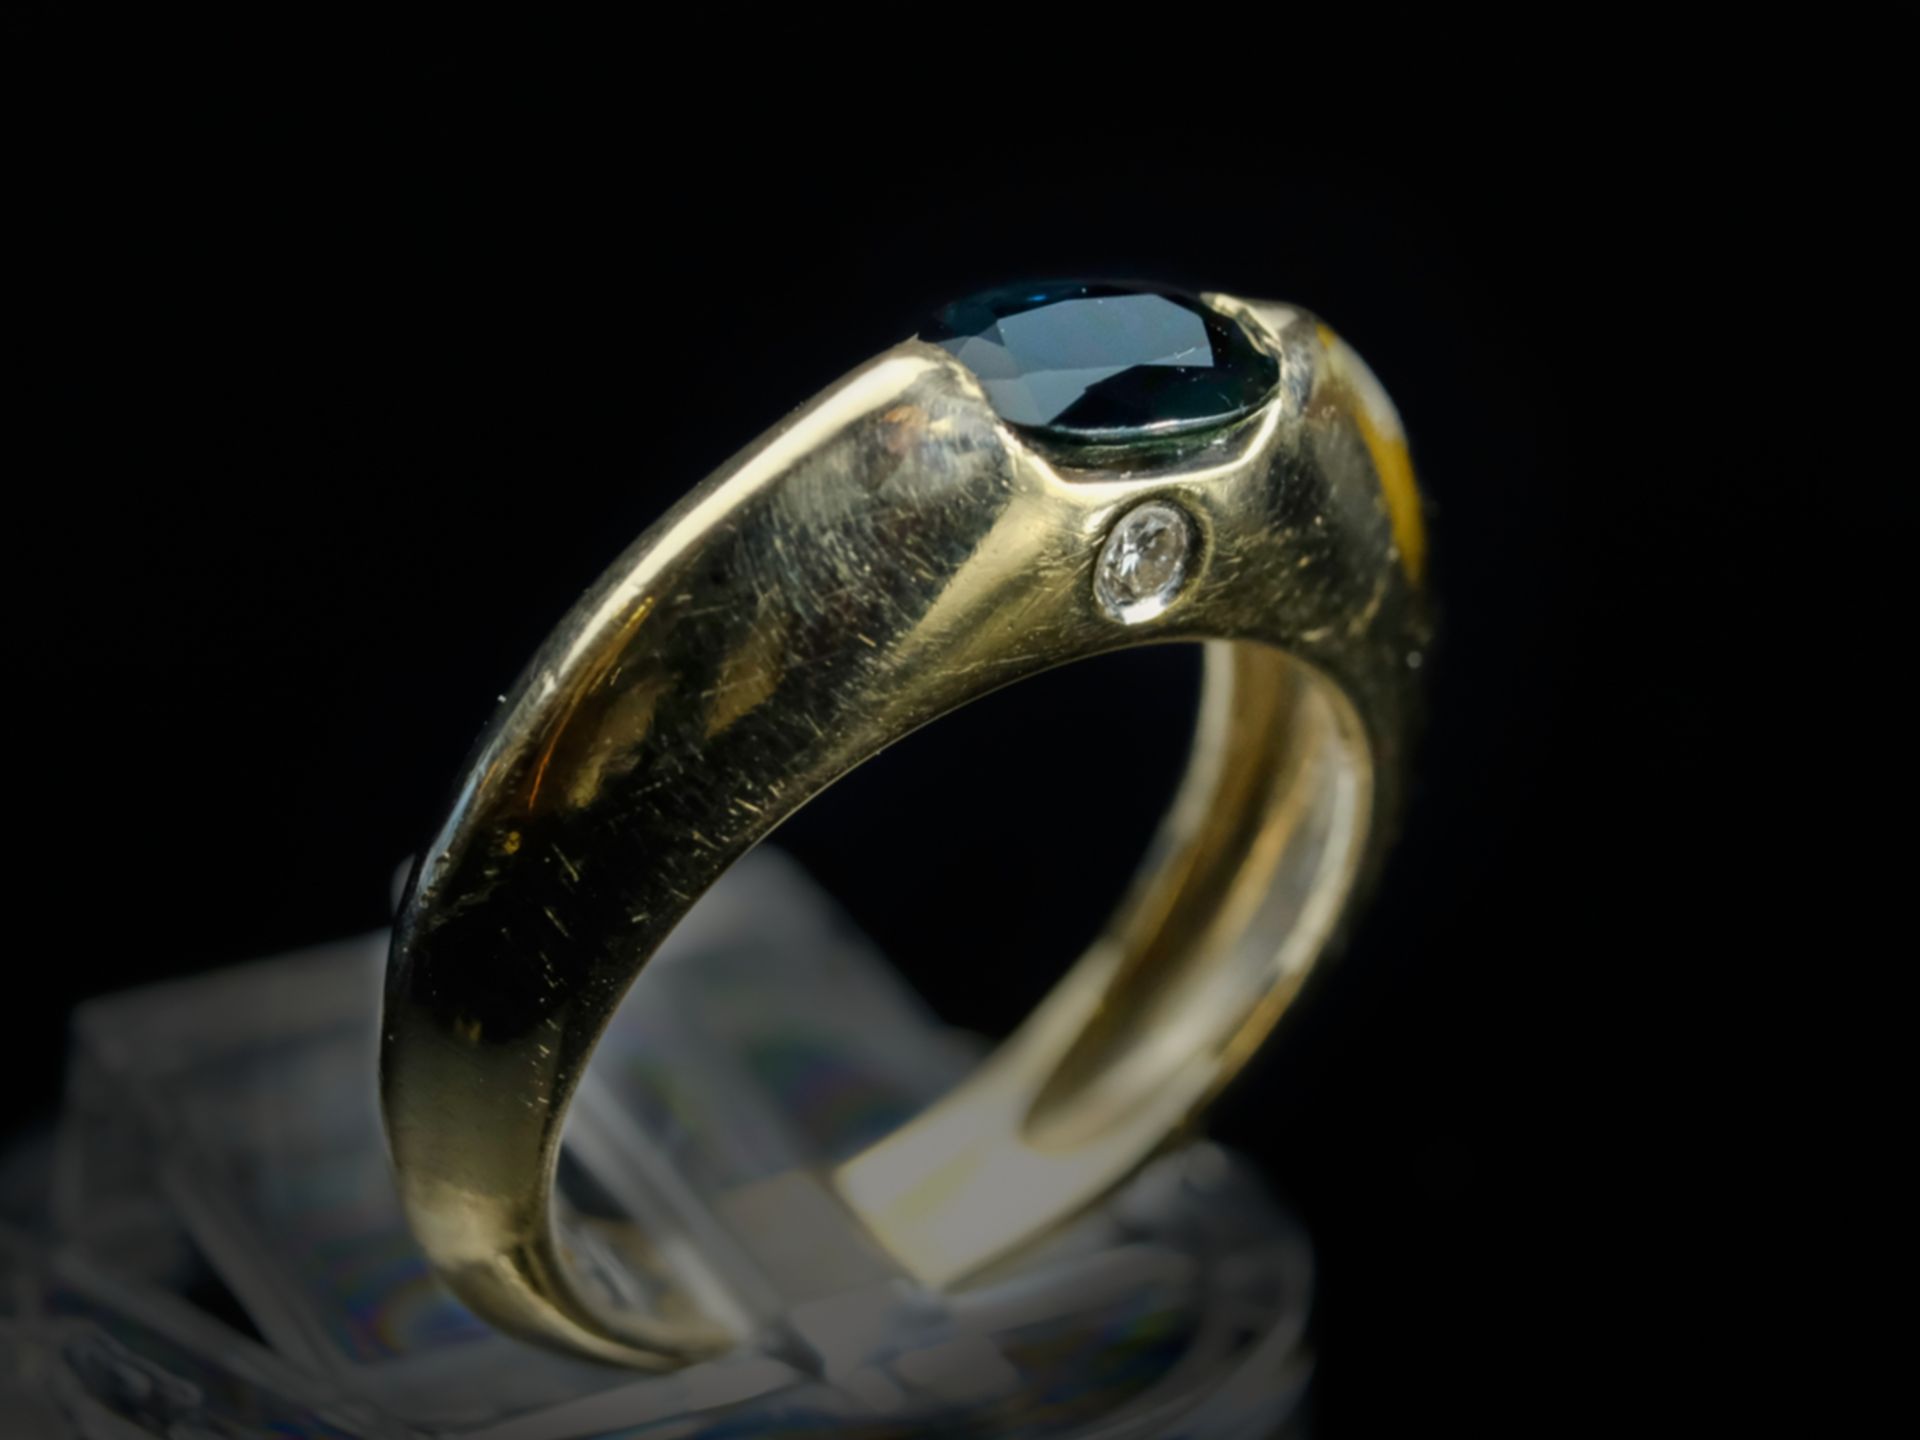 PIAGET RING set with dark blue oval sapphire (0.81ct), a brilliant-cut diamond around 0.03ct on the